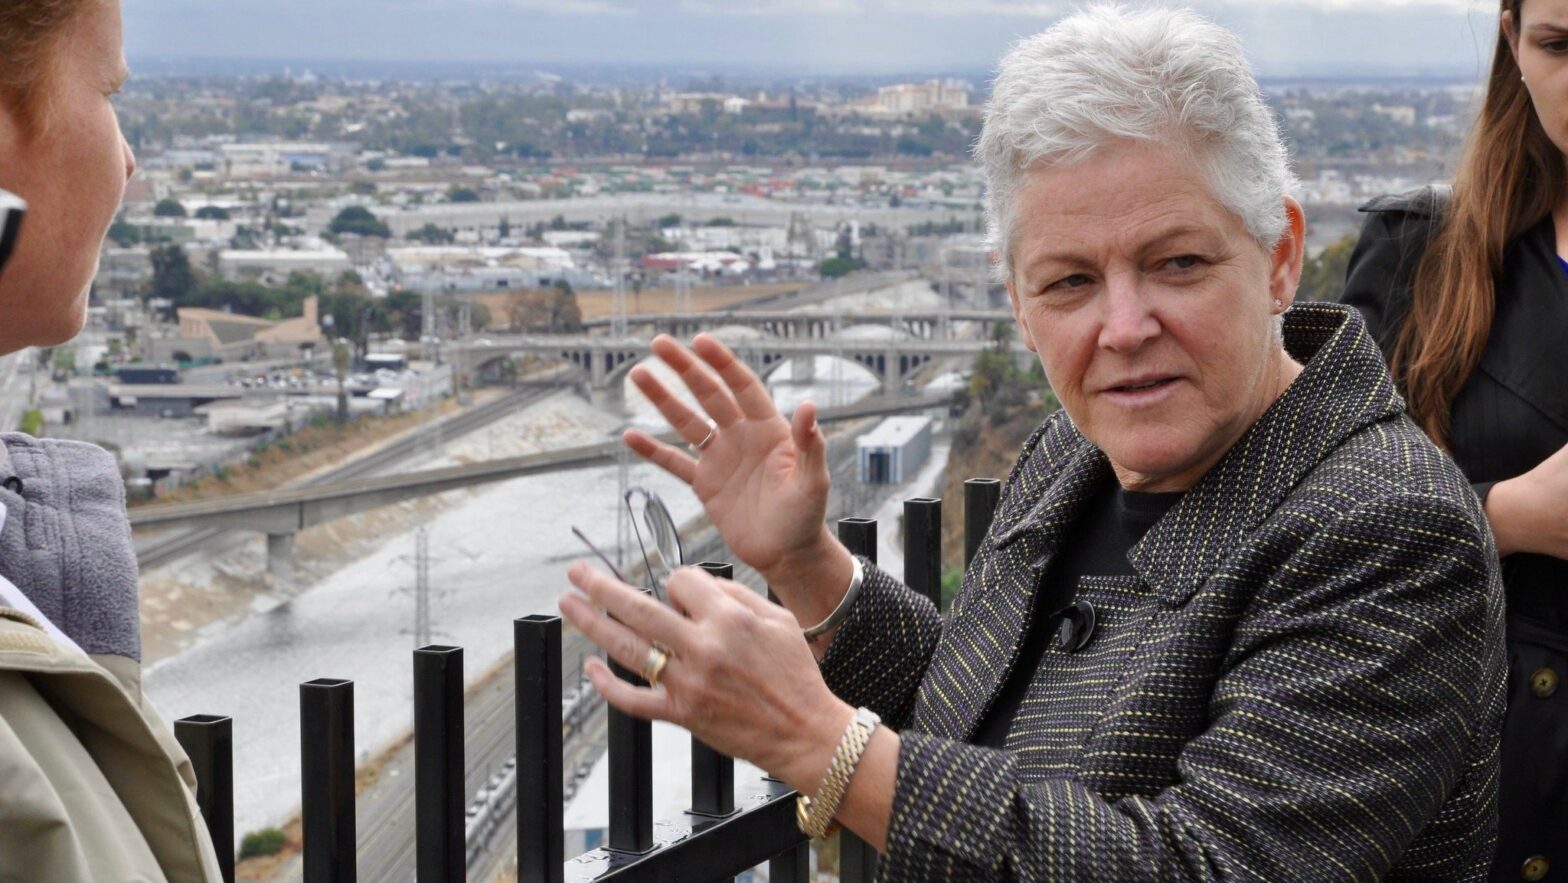 Are We at a Climate Change Turning Point? Obama’s EPA Chief Thinks So